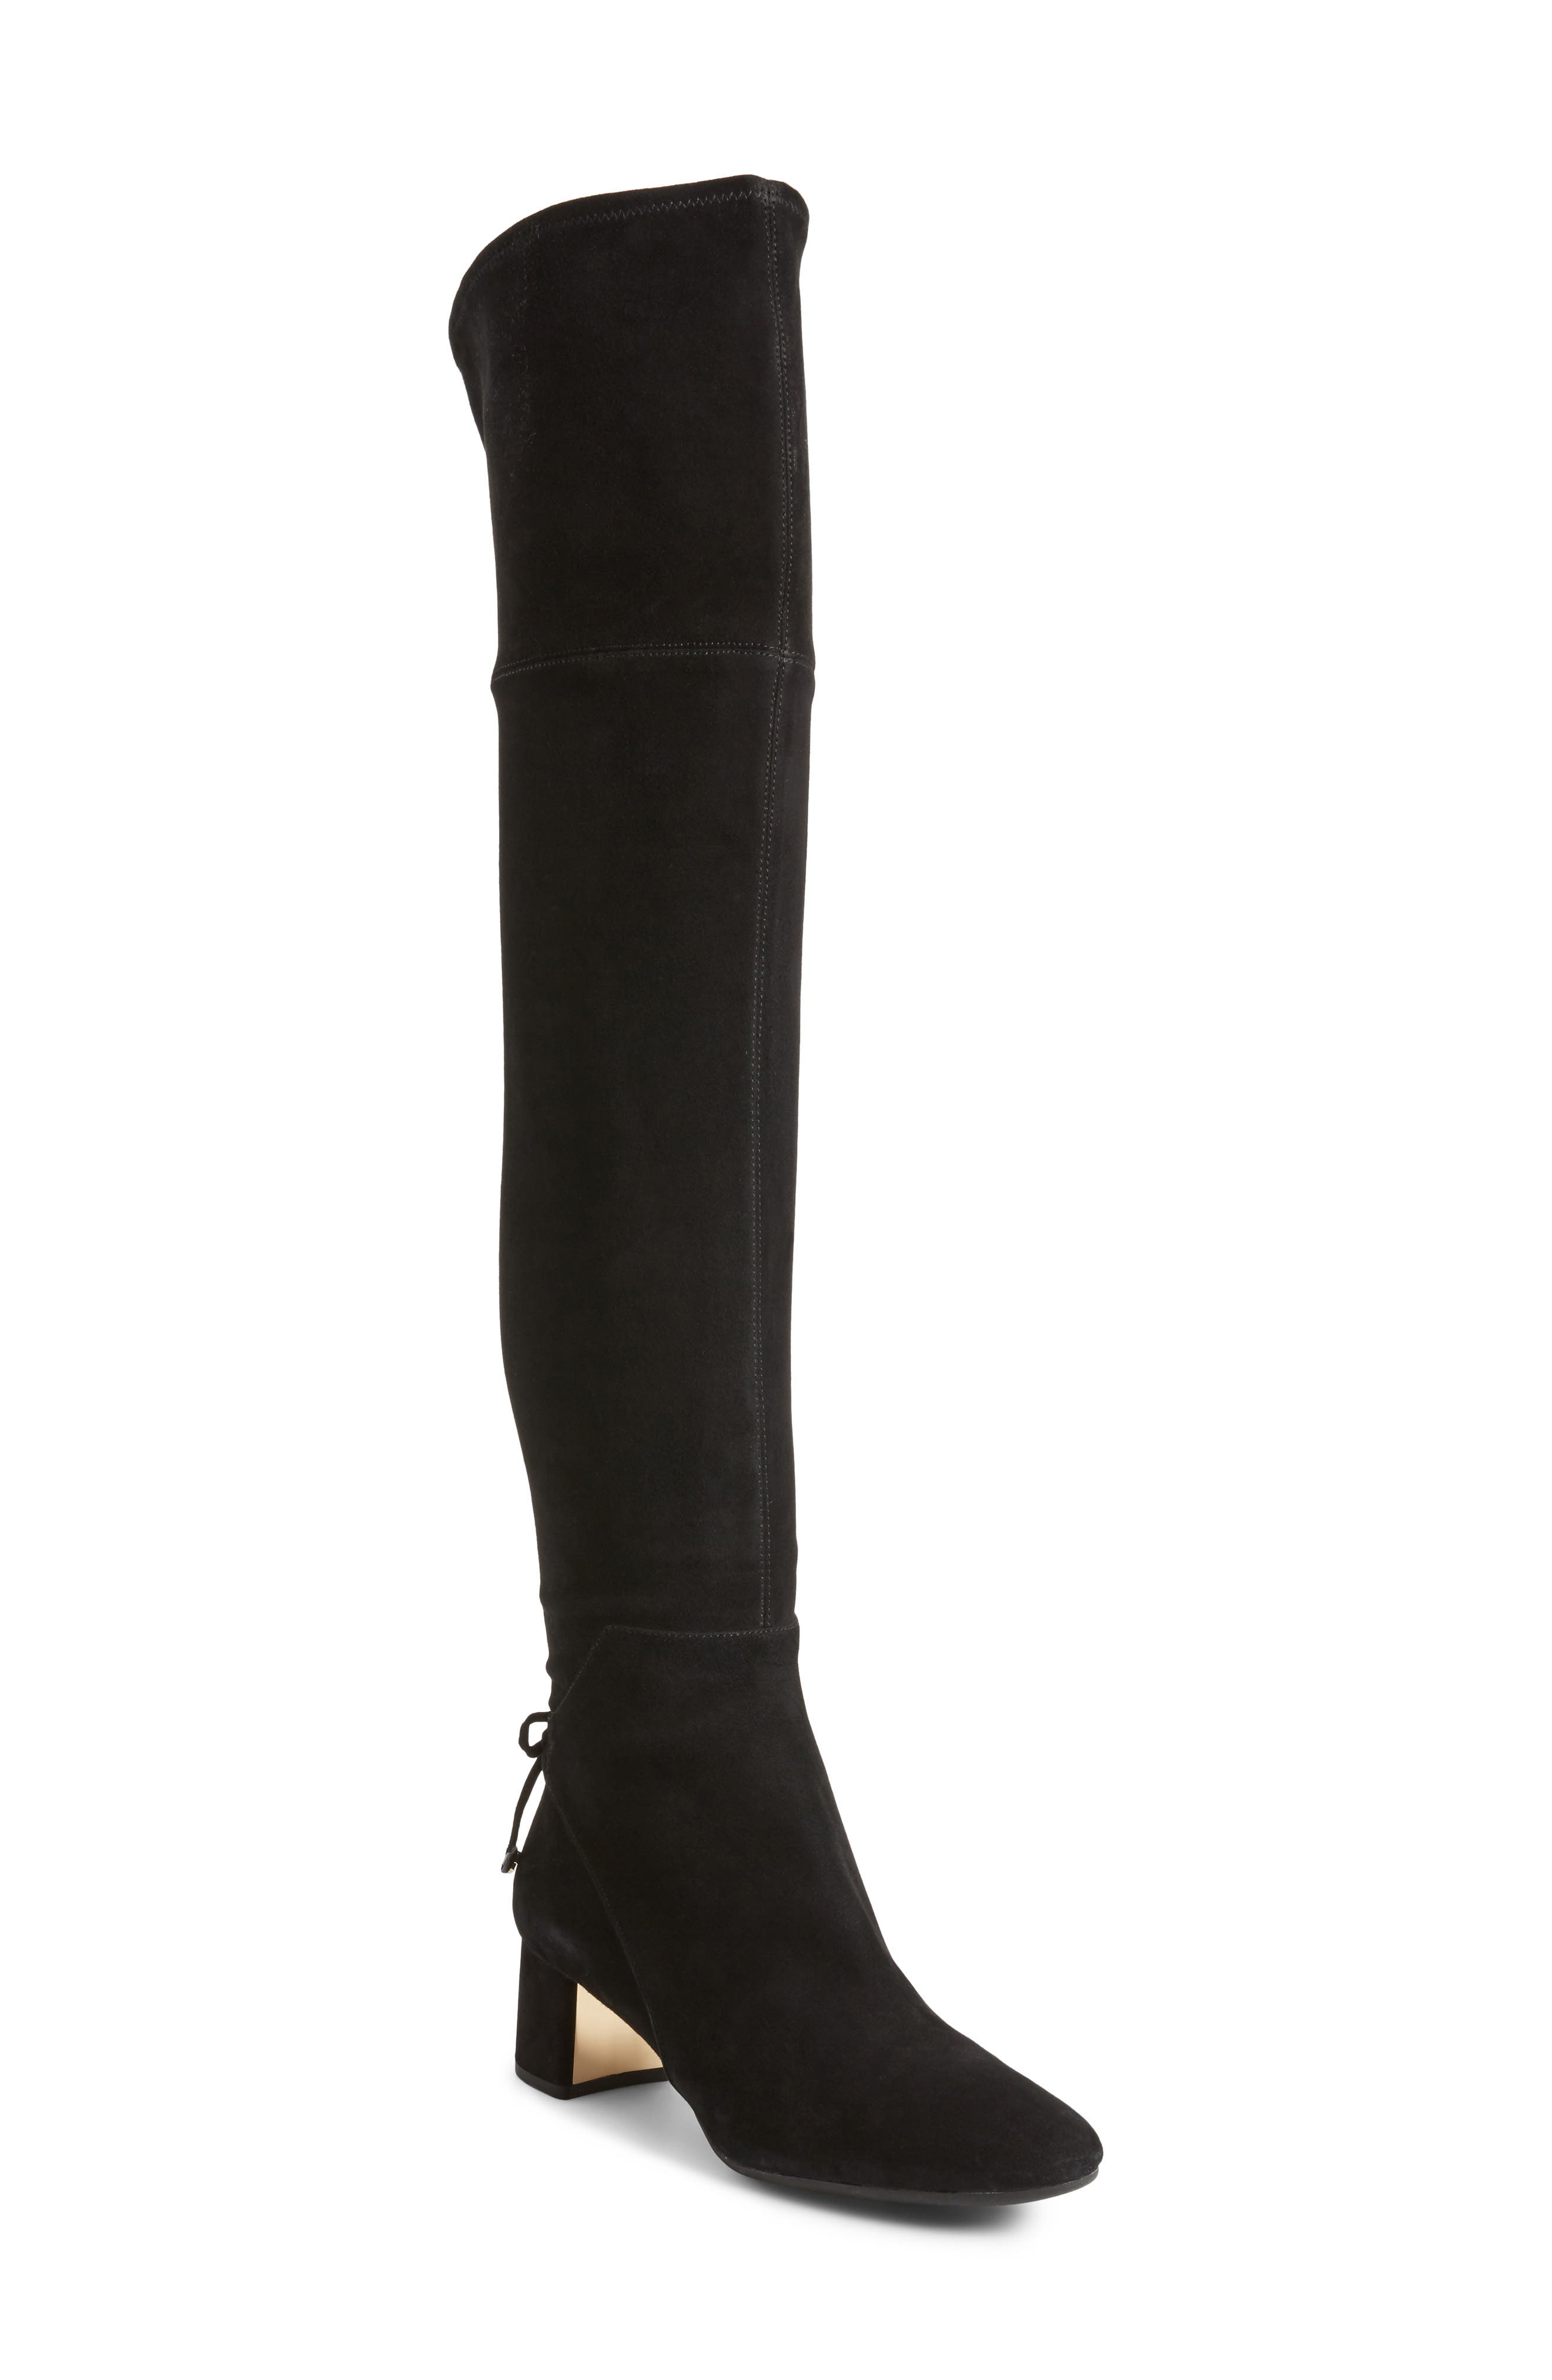 Tory Burch | Laila Over the Knee Boot | Nordstrom Rack